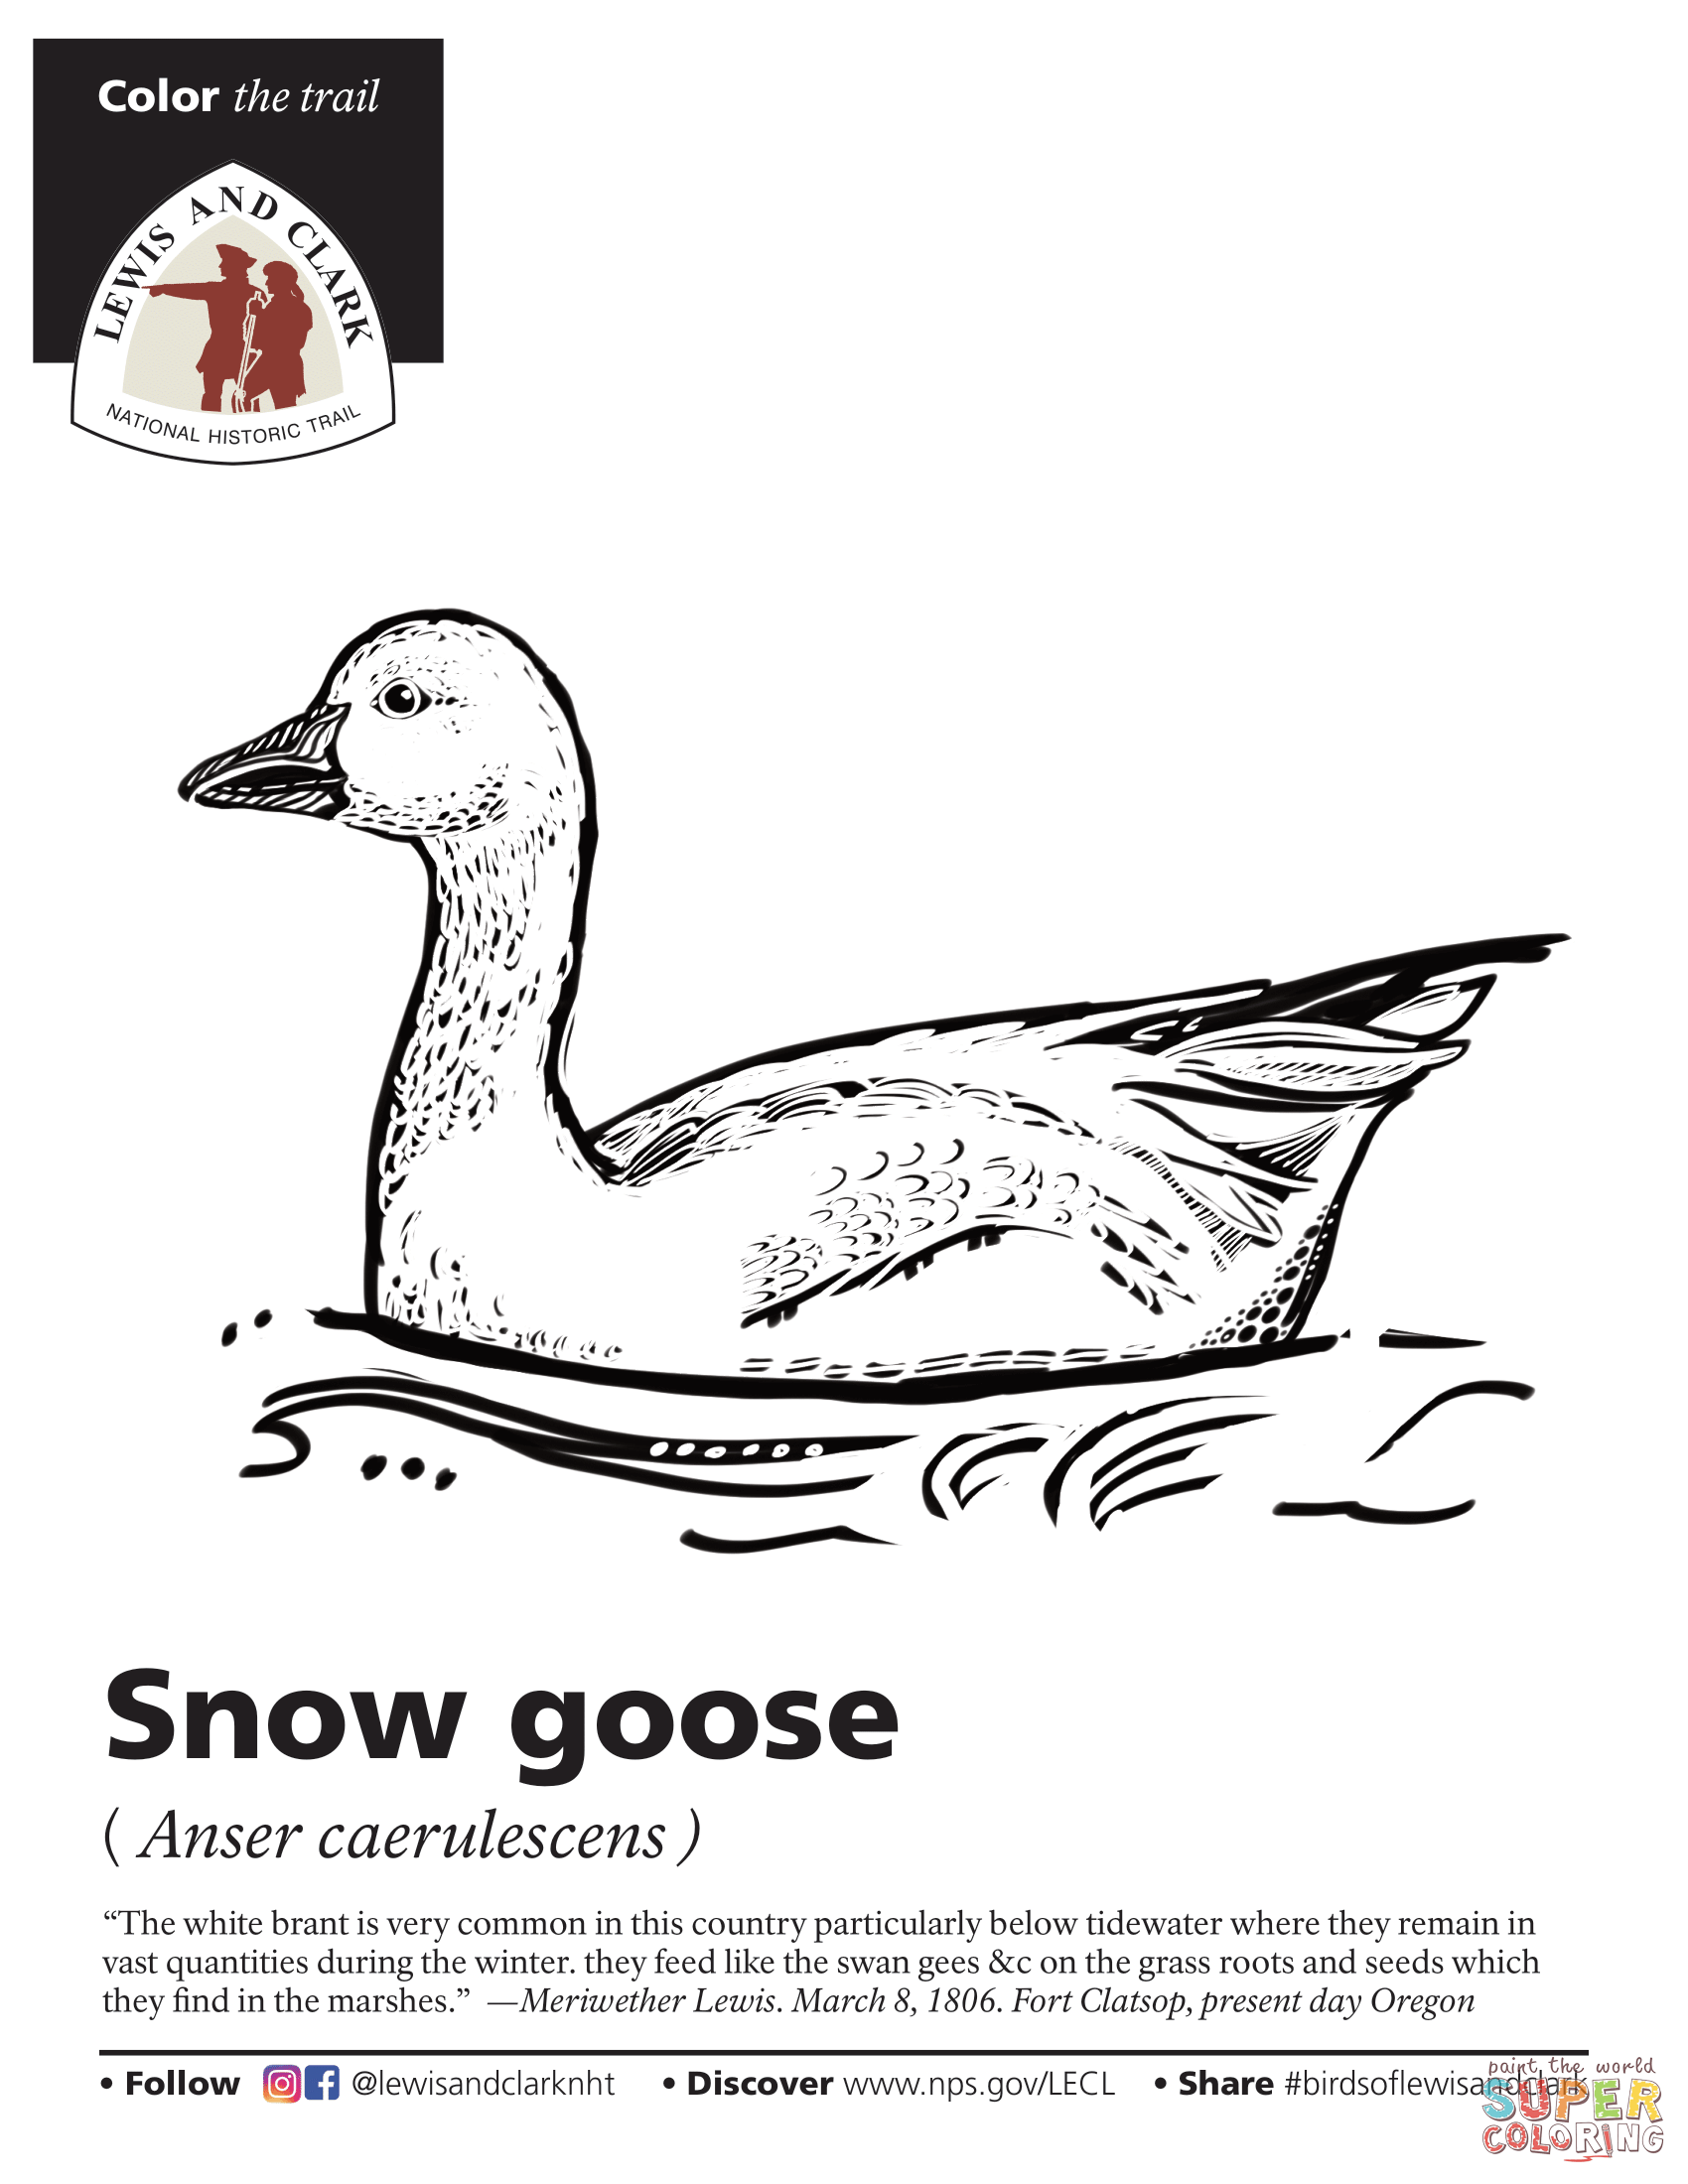 Snow goose anser caerulescens coloring page free printable coloring pages